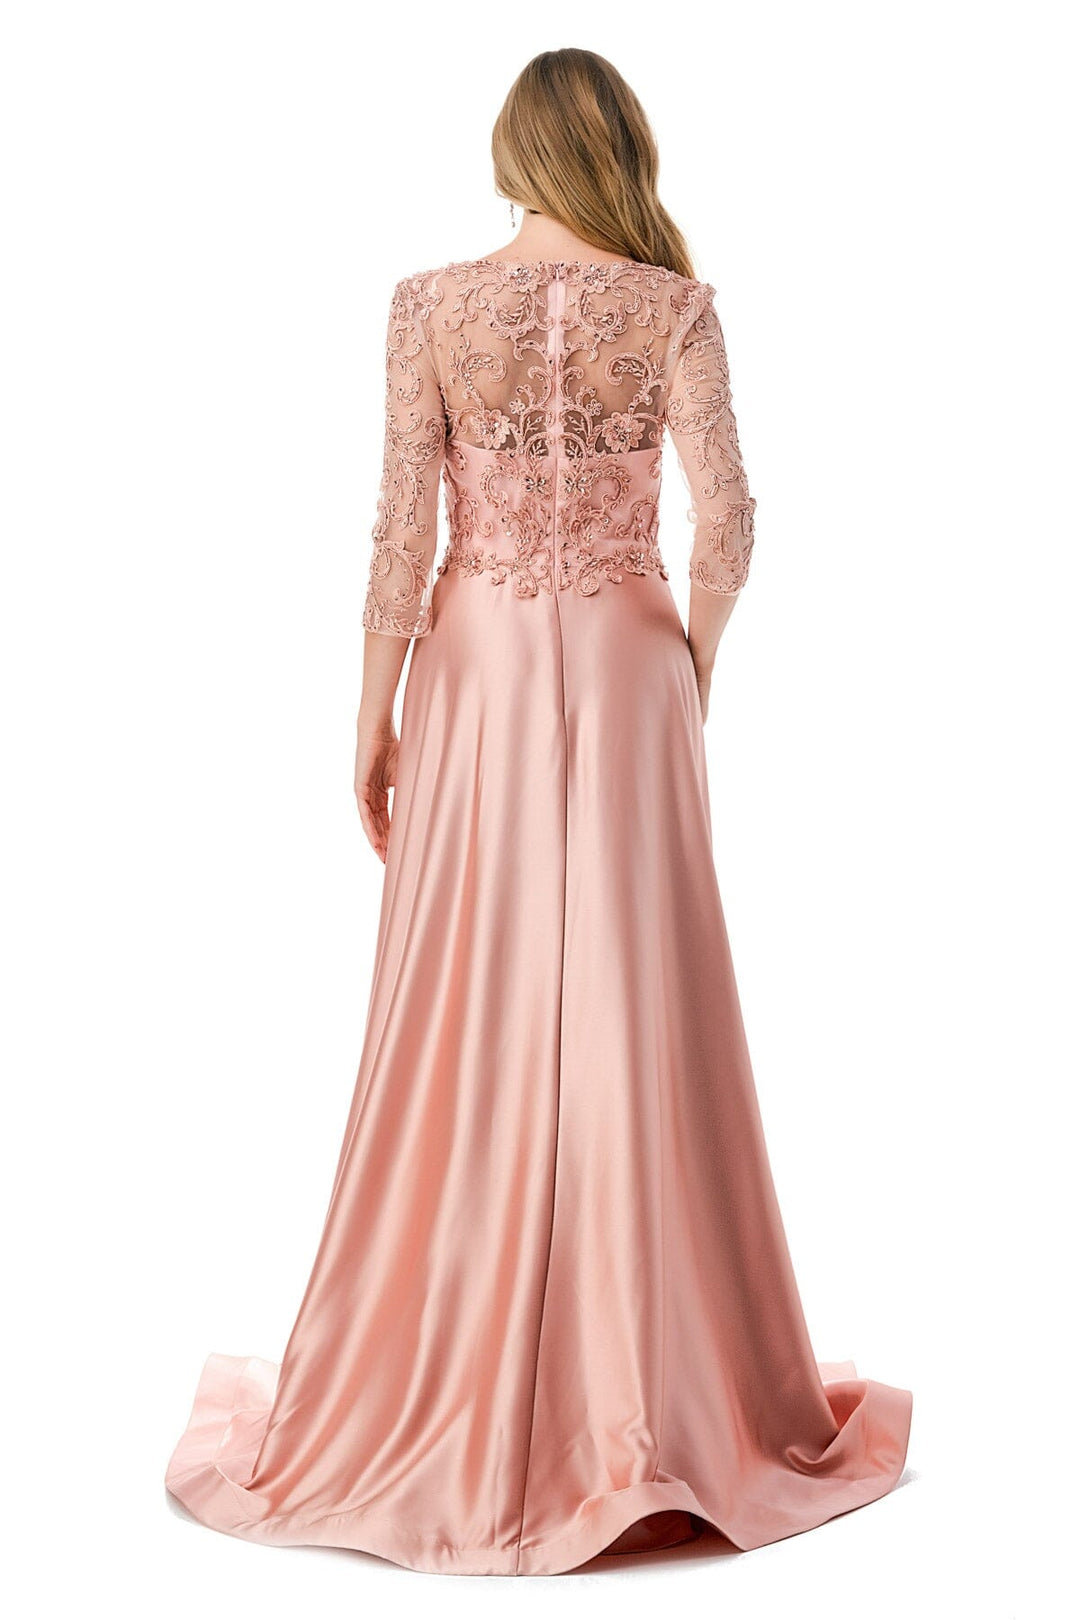 Embroidered 3/4 Sleeve A-line Gown by Coya M2734F